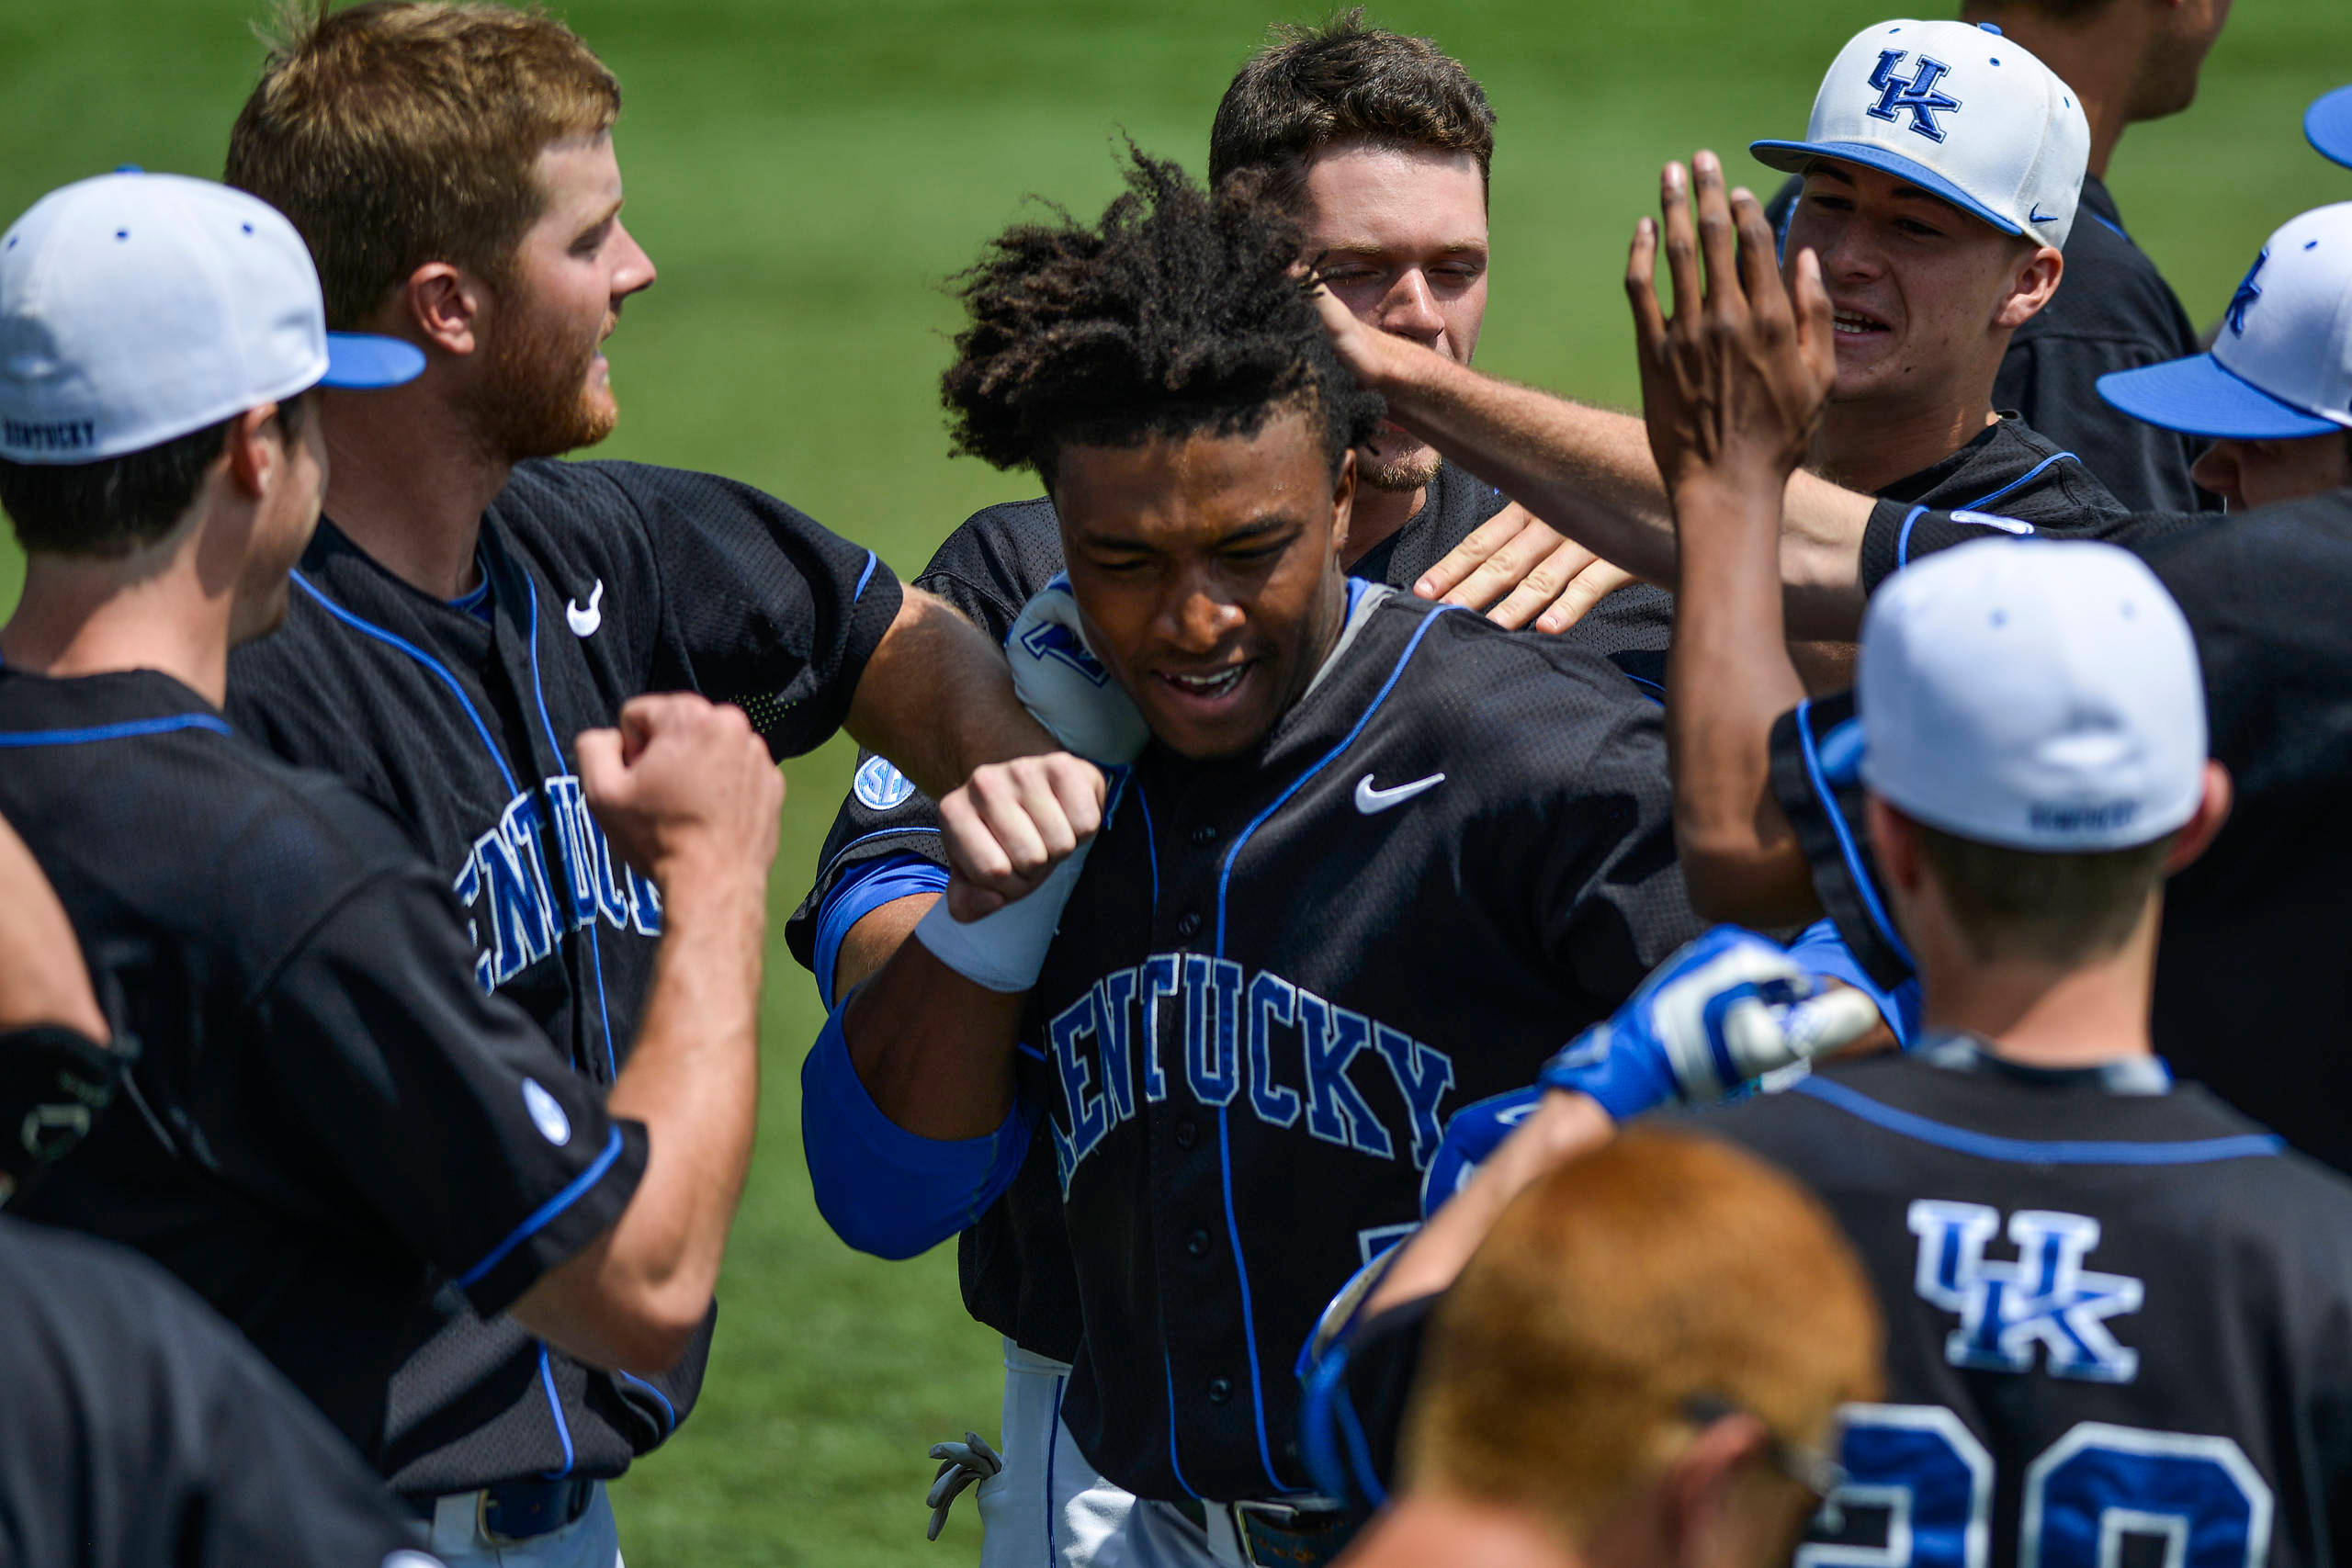 Wildcats Ranked No. 29 by Collegiate Baseball